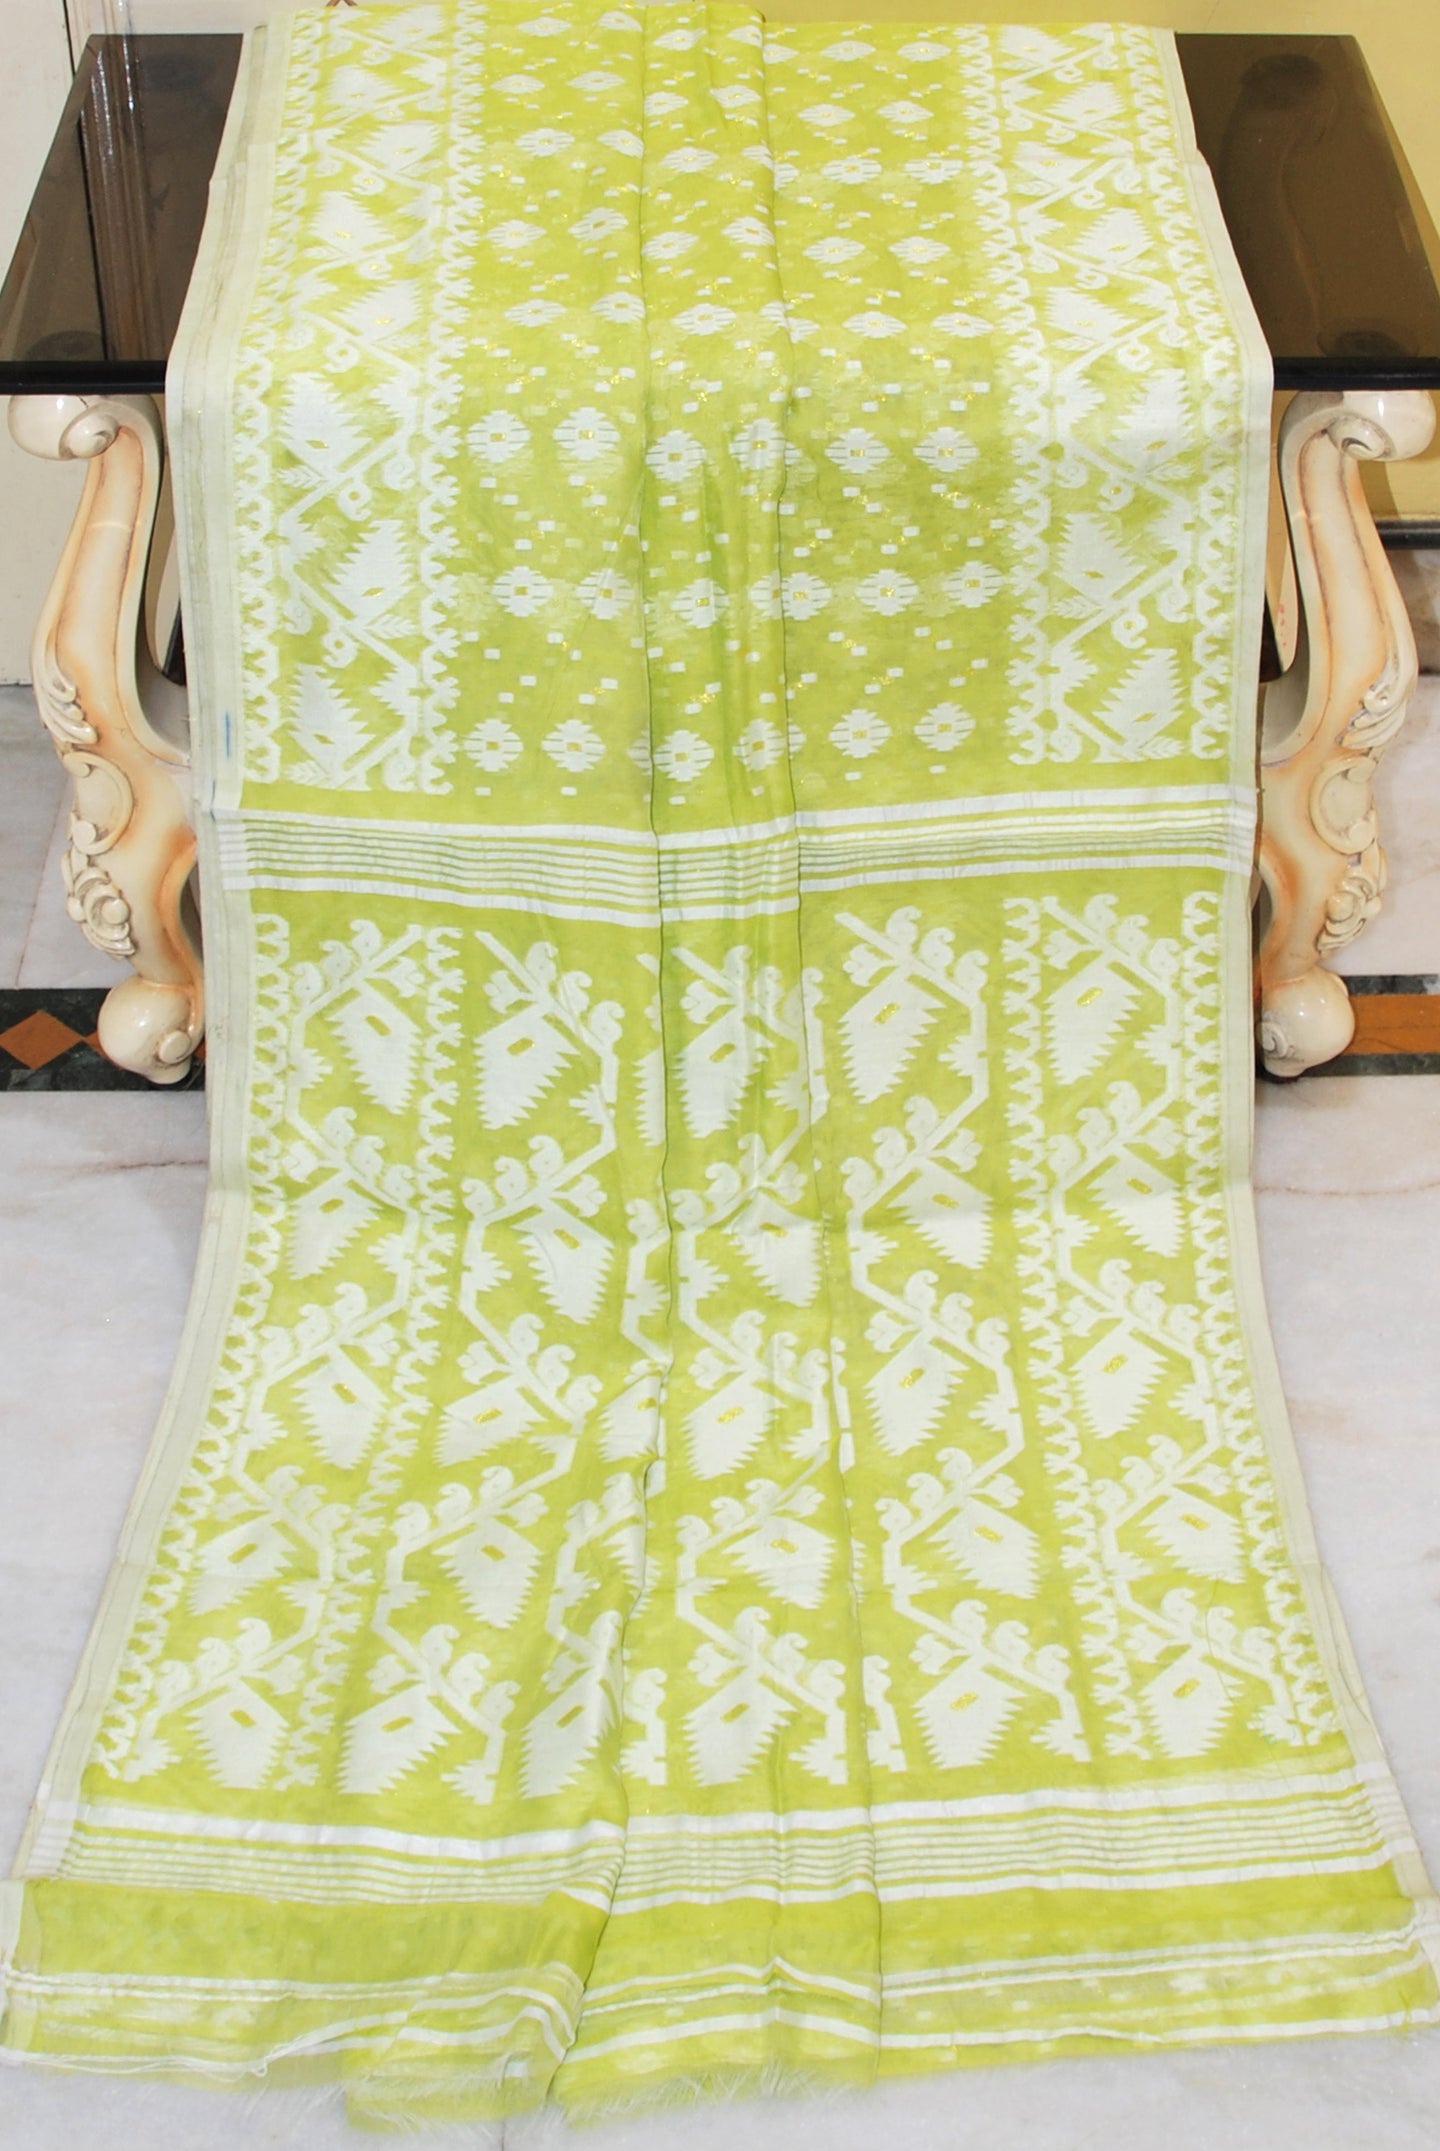 Traditional Cotton Muslin Soft Jamdani Saree in Lime Green, Off White and Gold